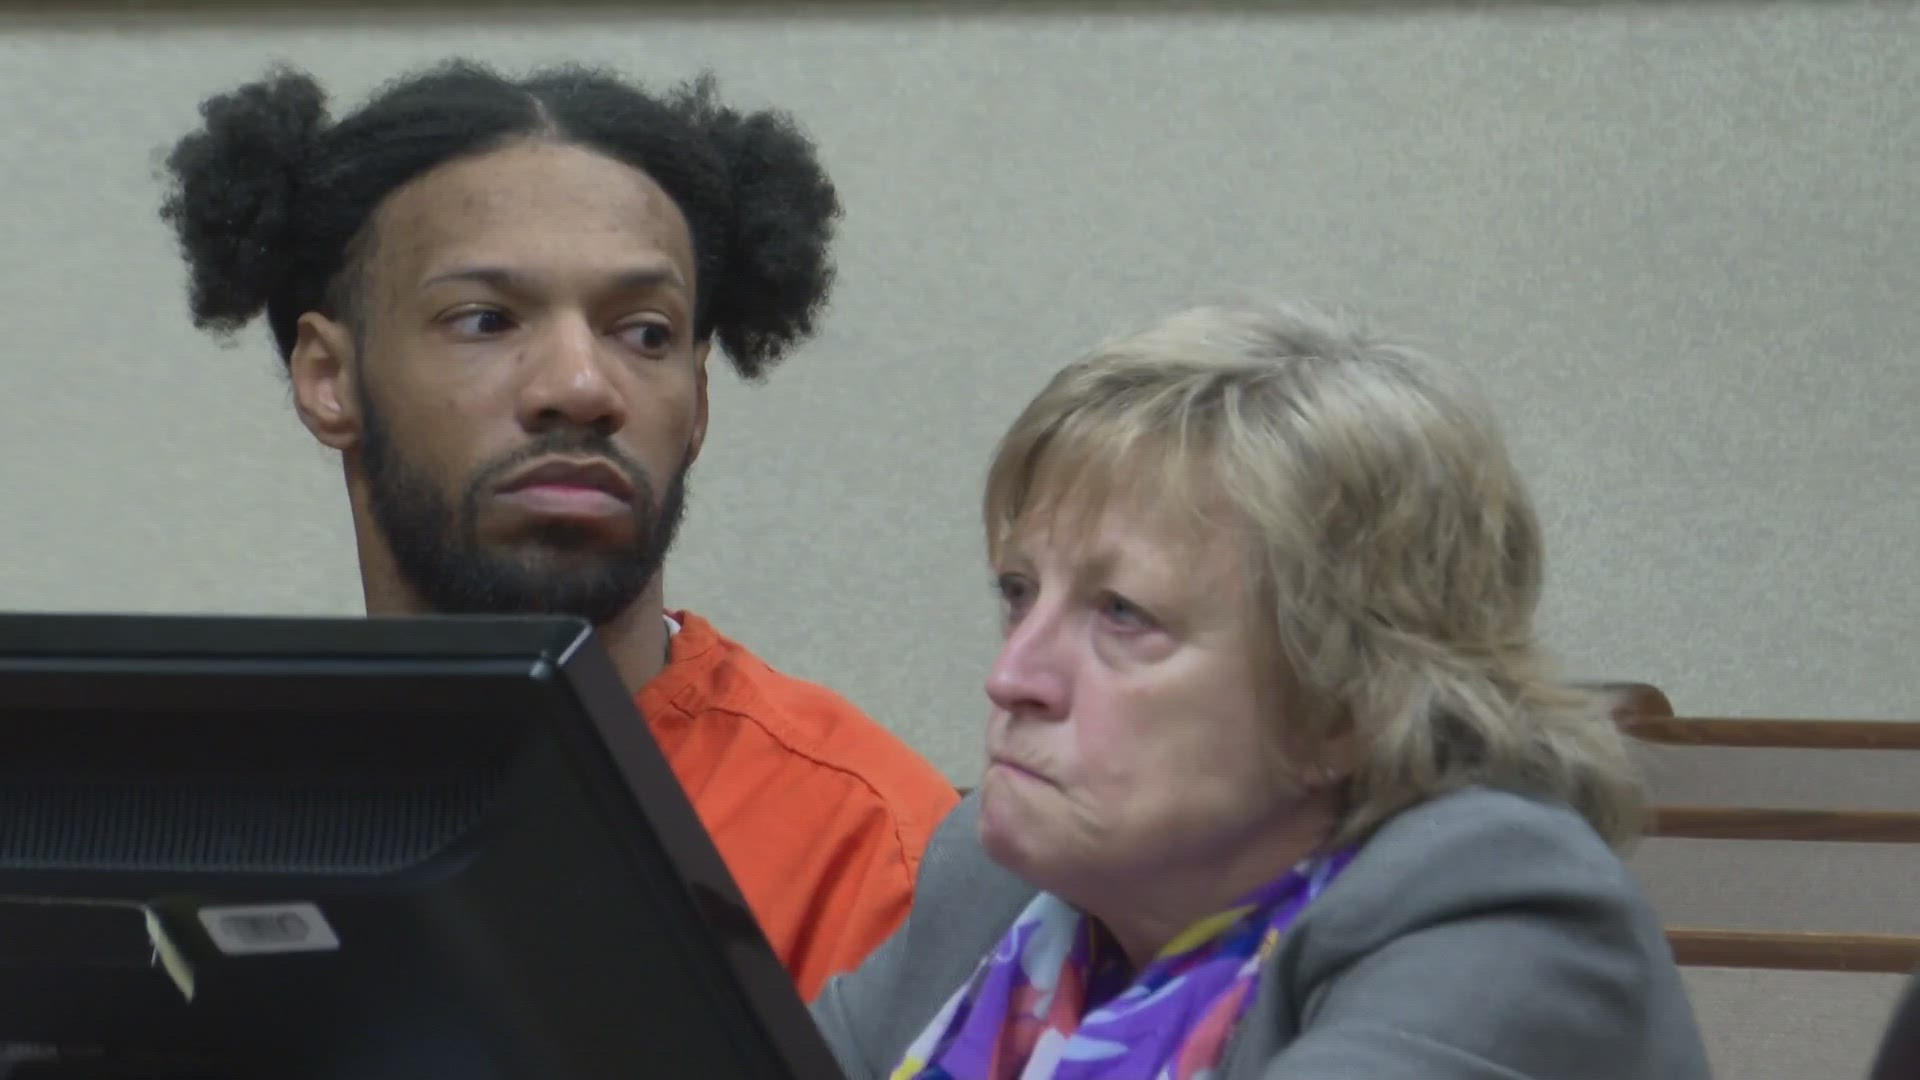 Herbert Lee, accused of attempted murder of a police officer last July in Shawnee Park, appeared in court on Monday.